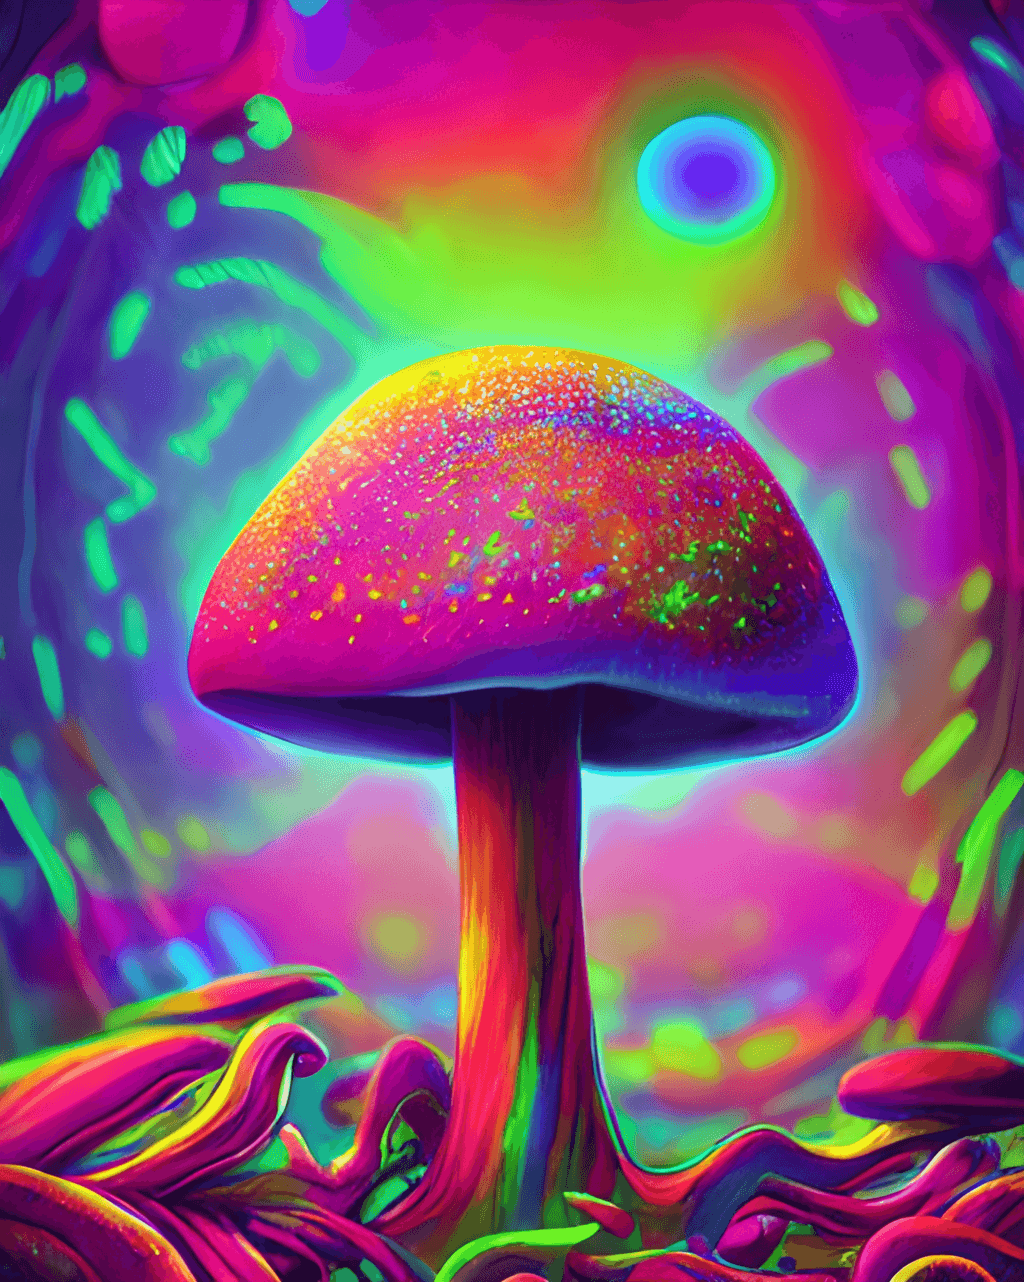 Epic Psychedelic Digital Painting of Beautiful Surreal UV Light Poster ...